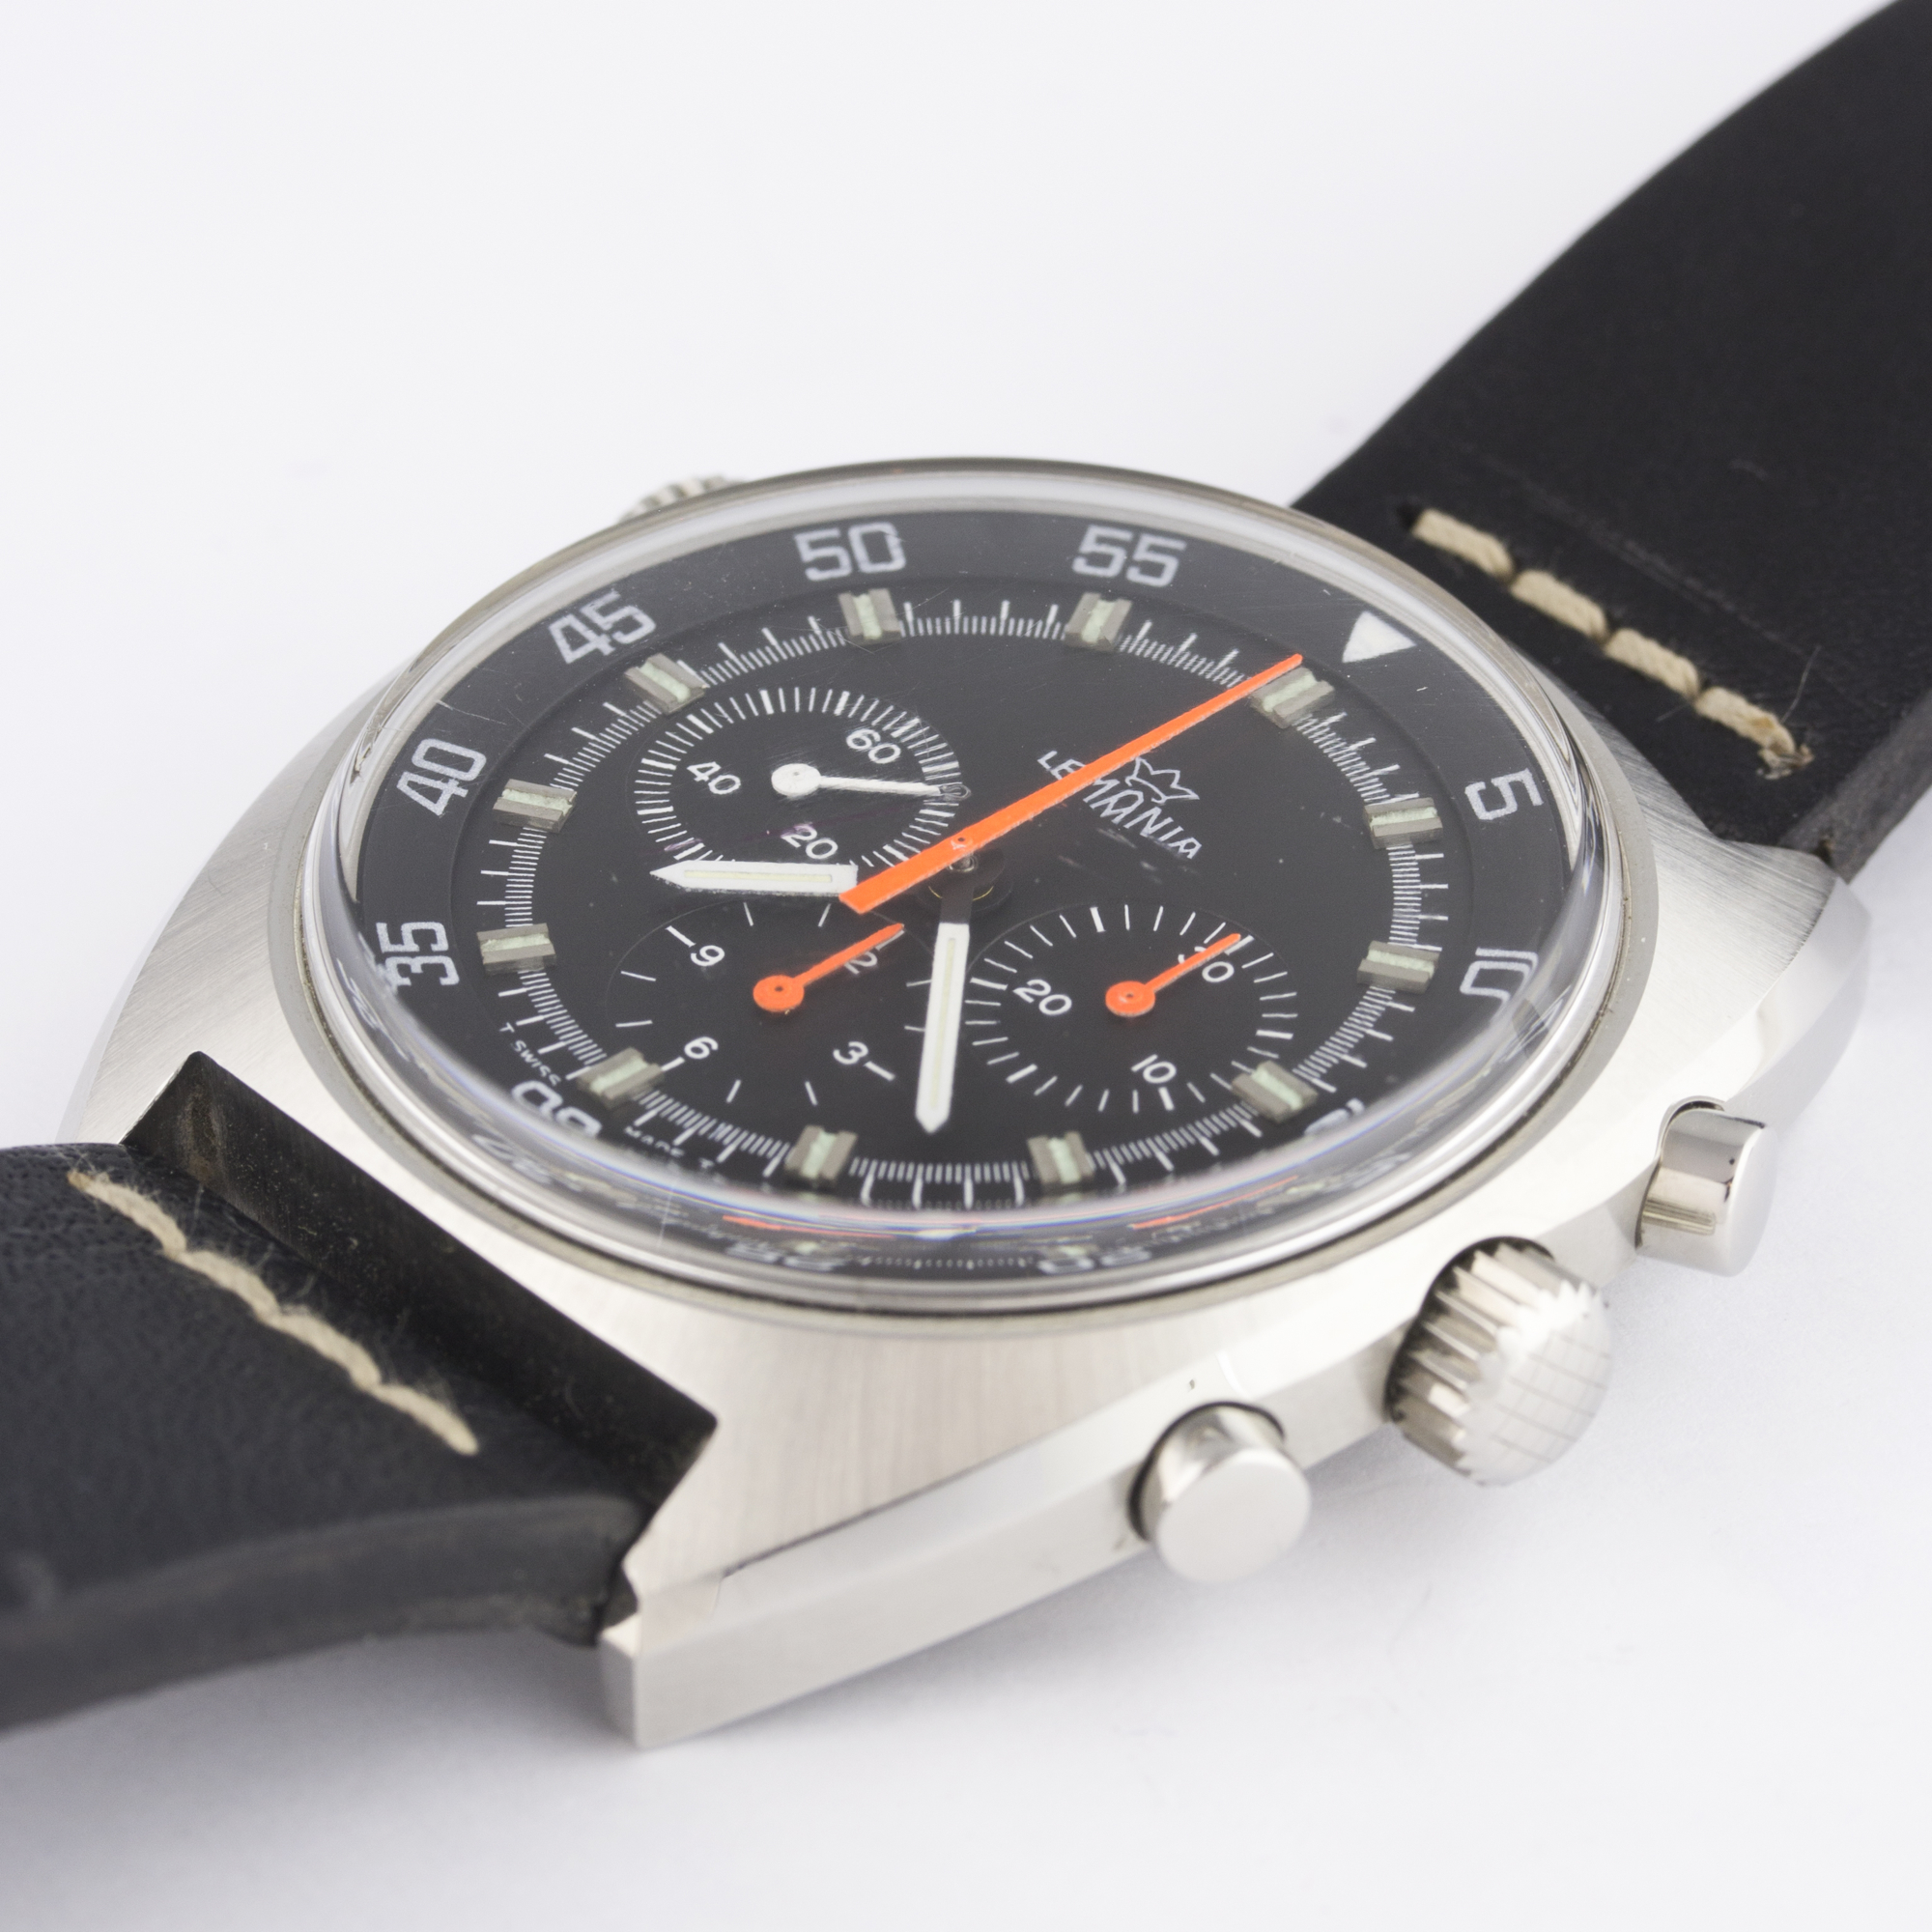 A RARE GENTLEMAN'S STAINLESS STEEL LEMANIA DIVERS CHRONOGRAPH WRIST WATCH CIRCA 1970s, REF. 9658 - Image 4 of 9